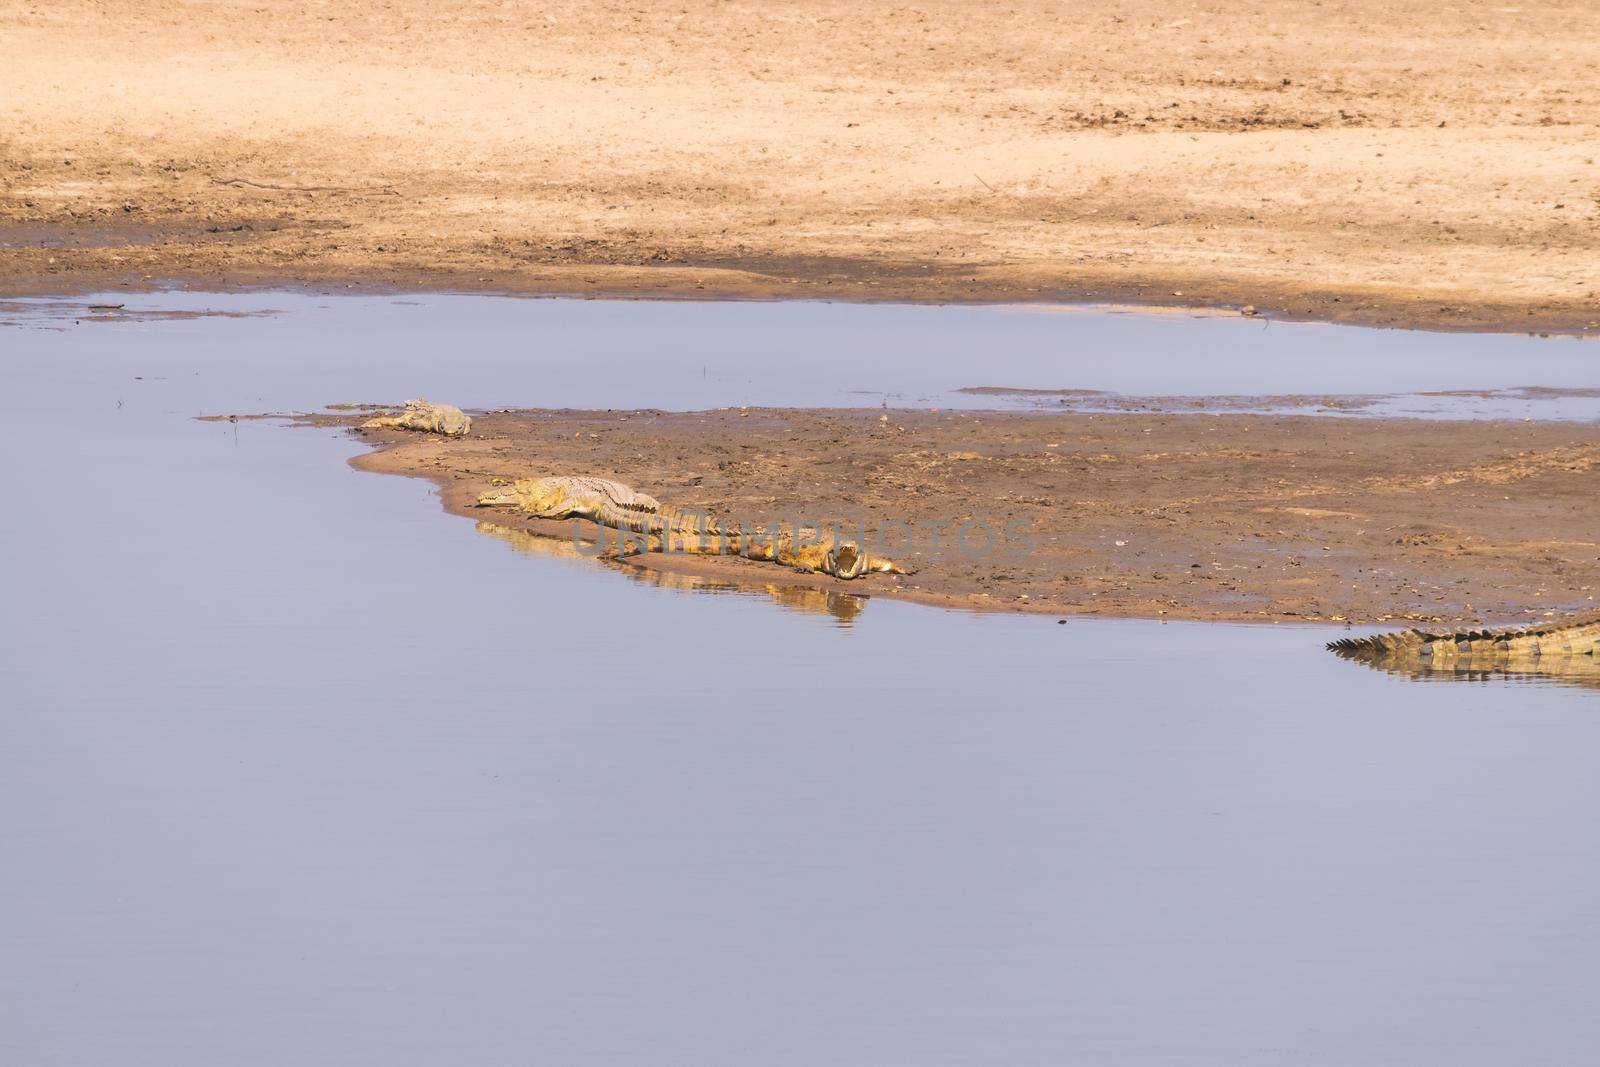 An mazing view of a group of crocodiles resting on the sandy banks of an African river